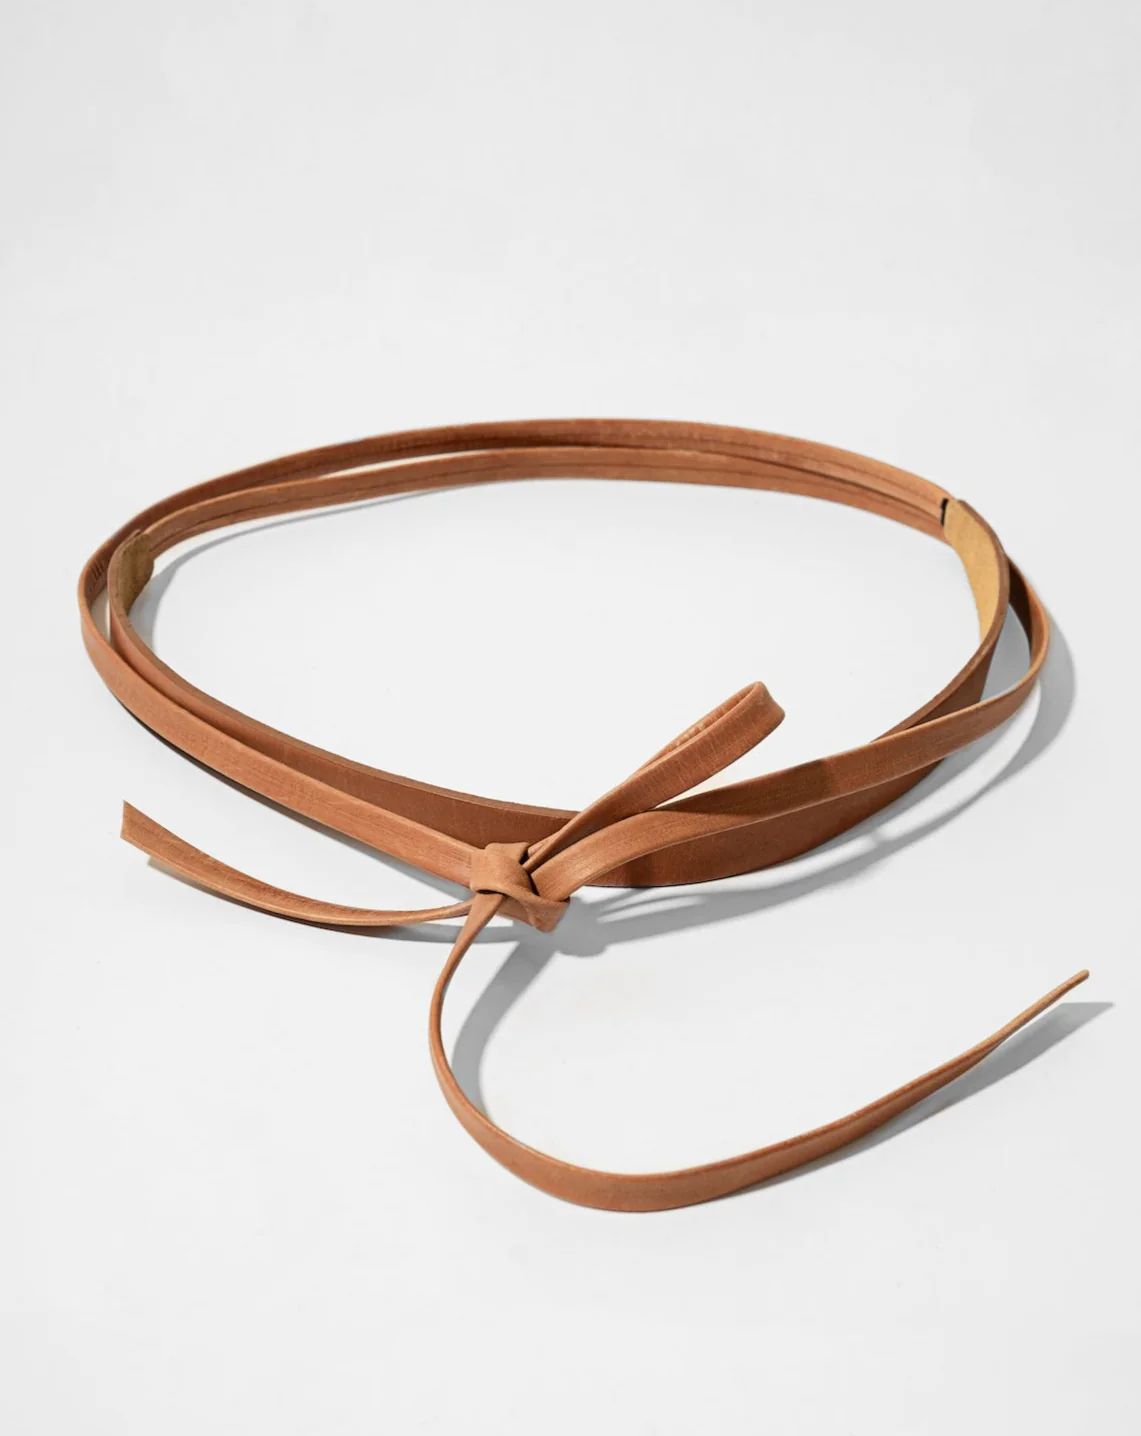 Skinny Wrap Cognac Belt | Fashion Belt | Leather Belts - ADA Collection | ADA Collection